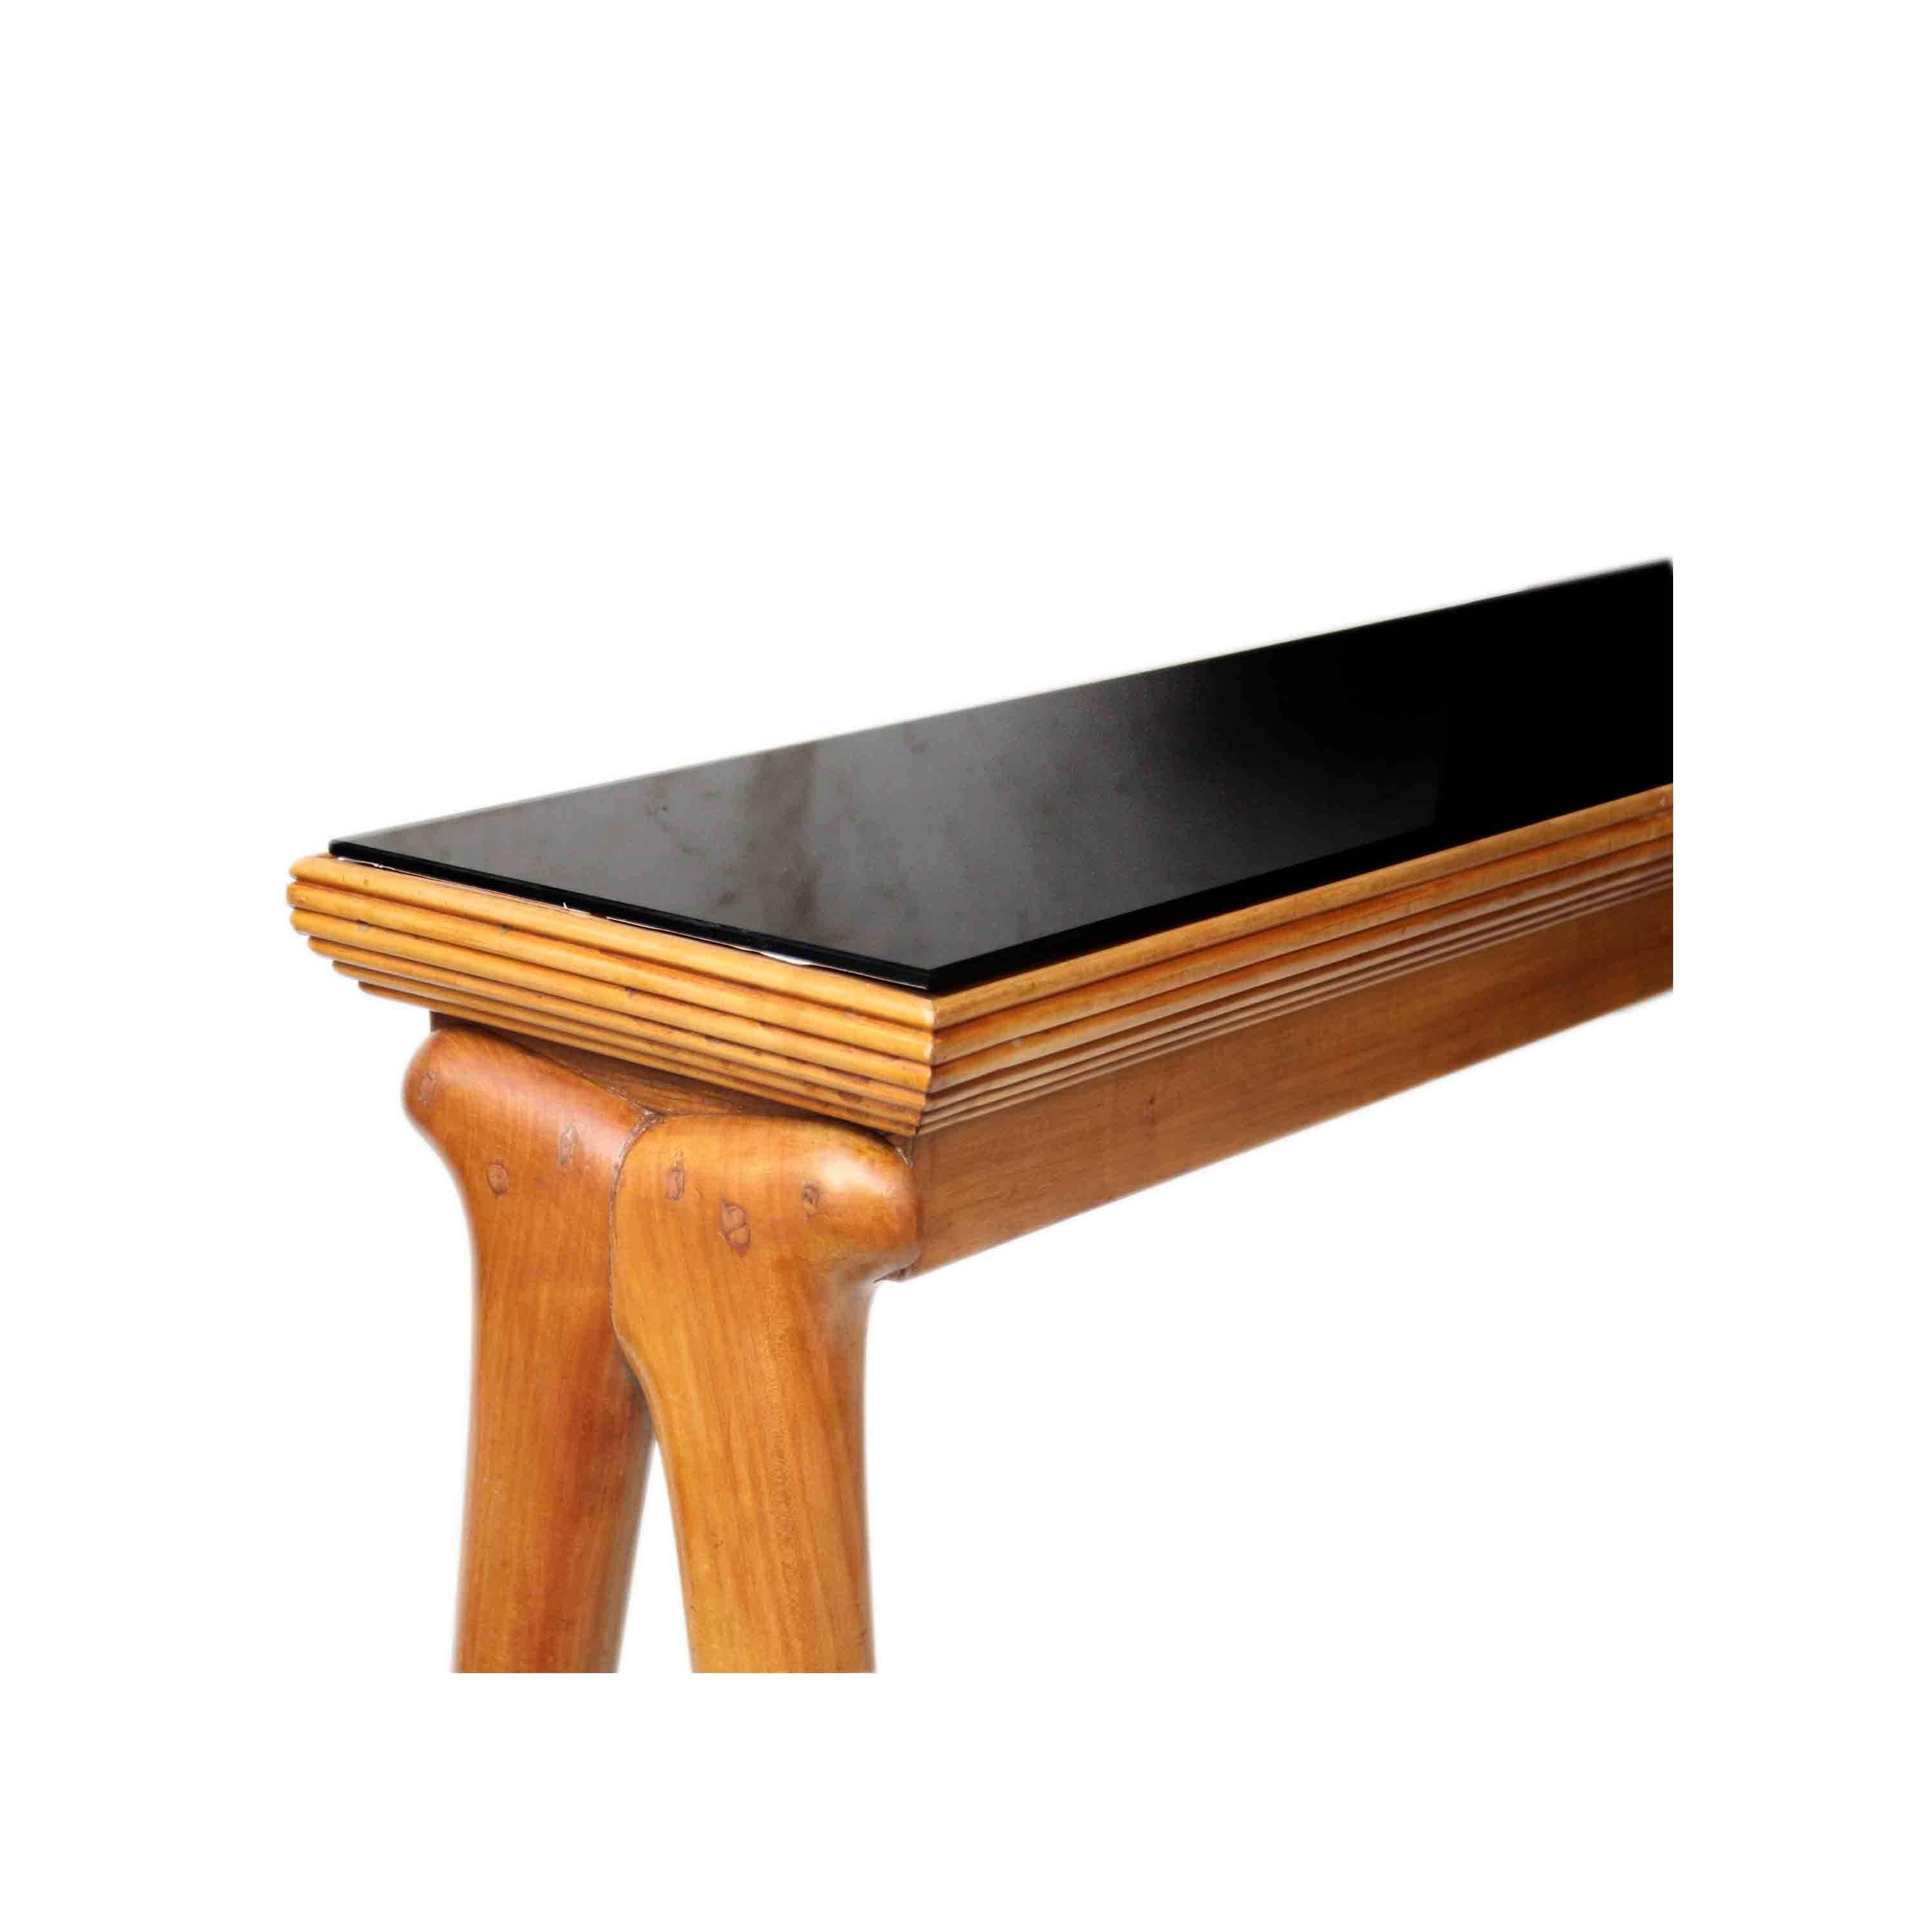 Oak wooden console with black glass tabletop.